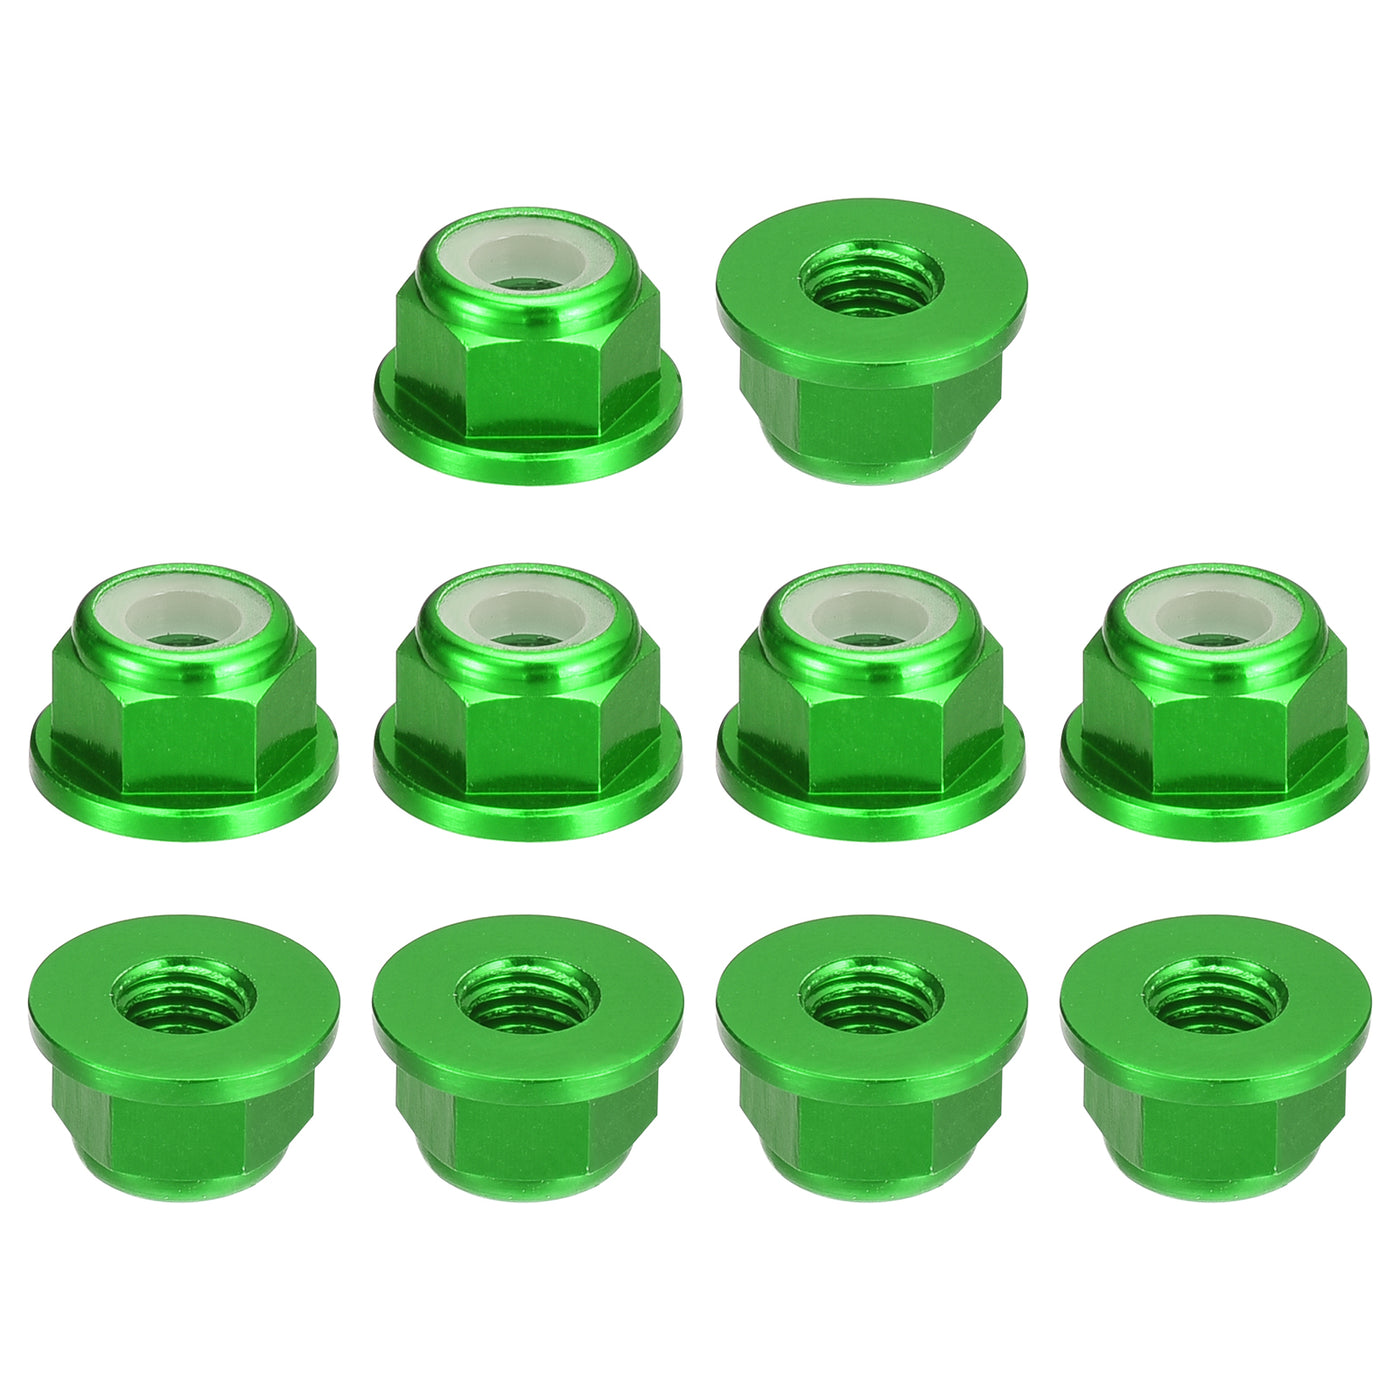 uxcell Uxcell Nylon Insert Hex Lock Nuts, 10pcs - M4 x 0.7mm Aluminum Alloy Self-Locking Nut, Anodizing Flange Lock Nut for Fasteners (Green)